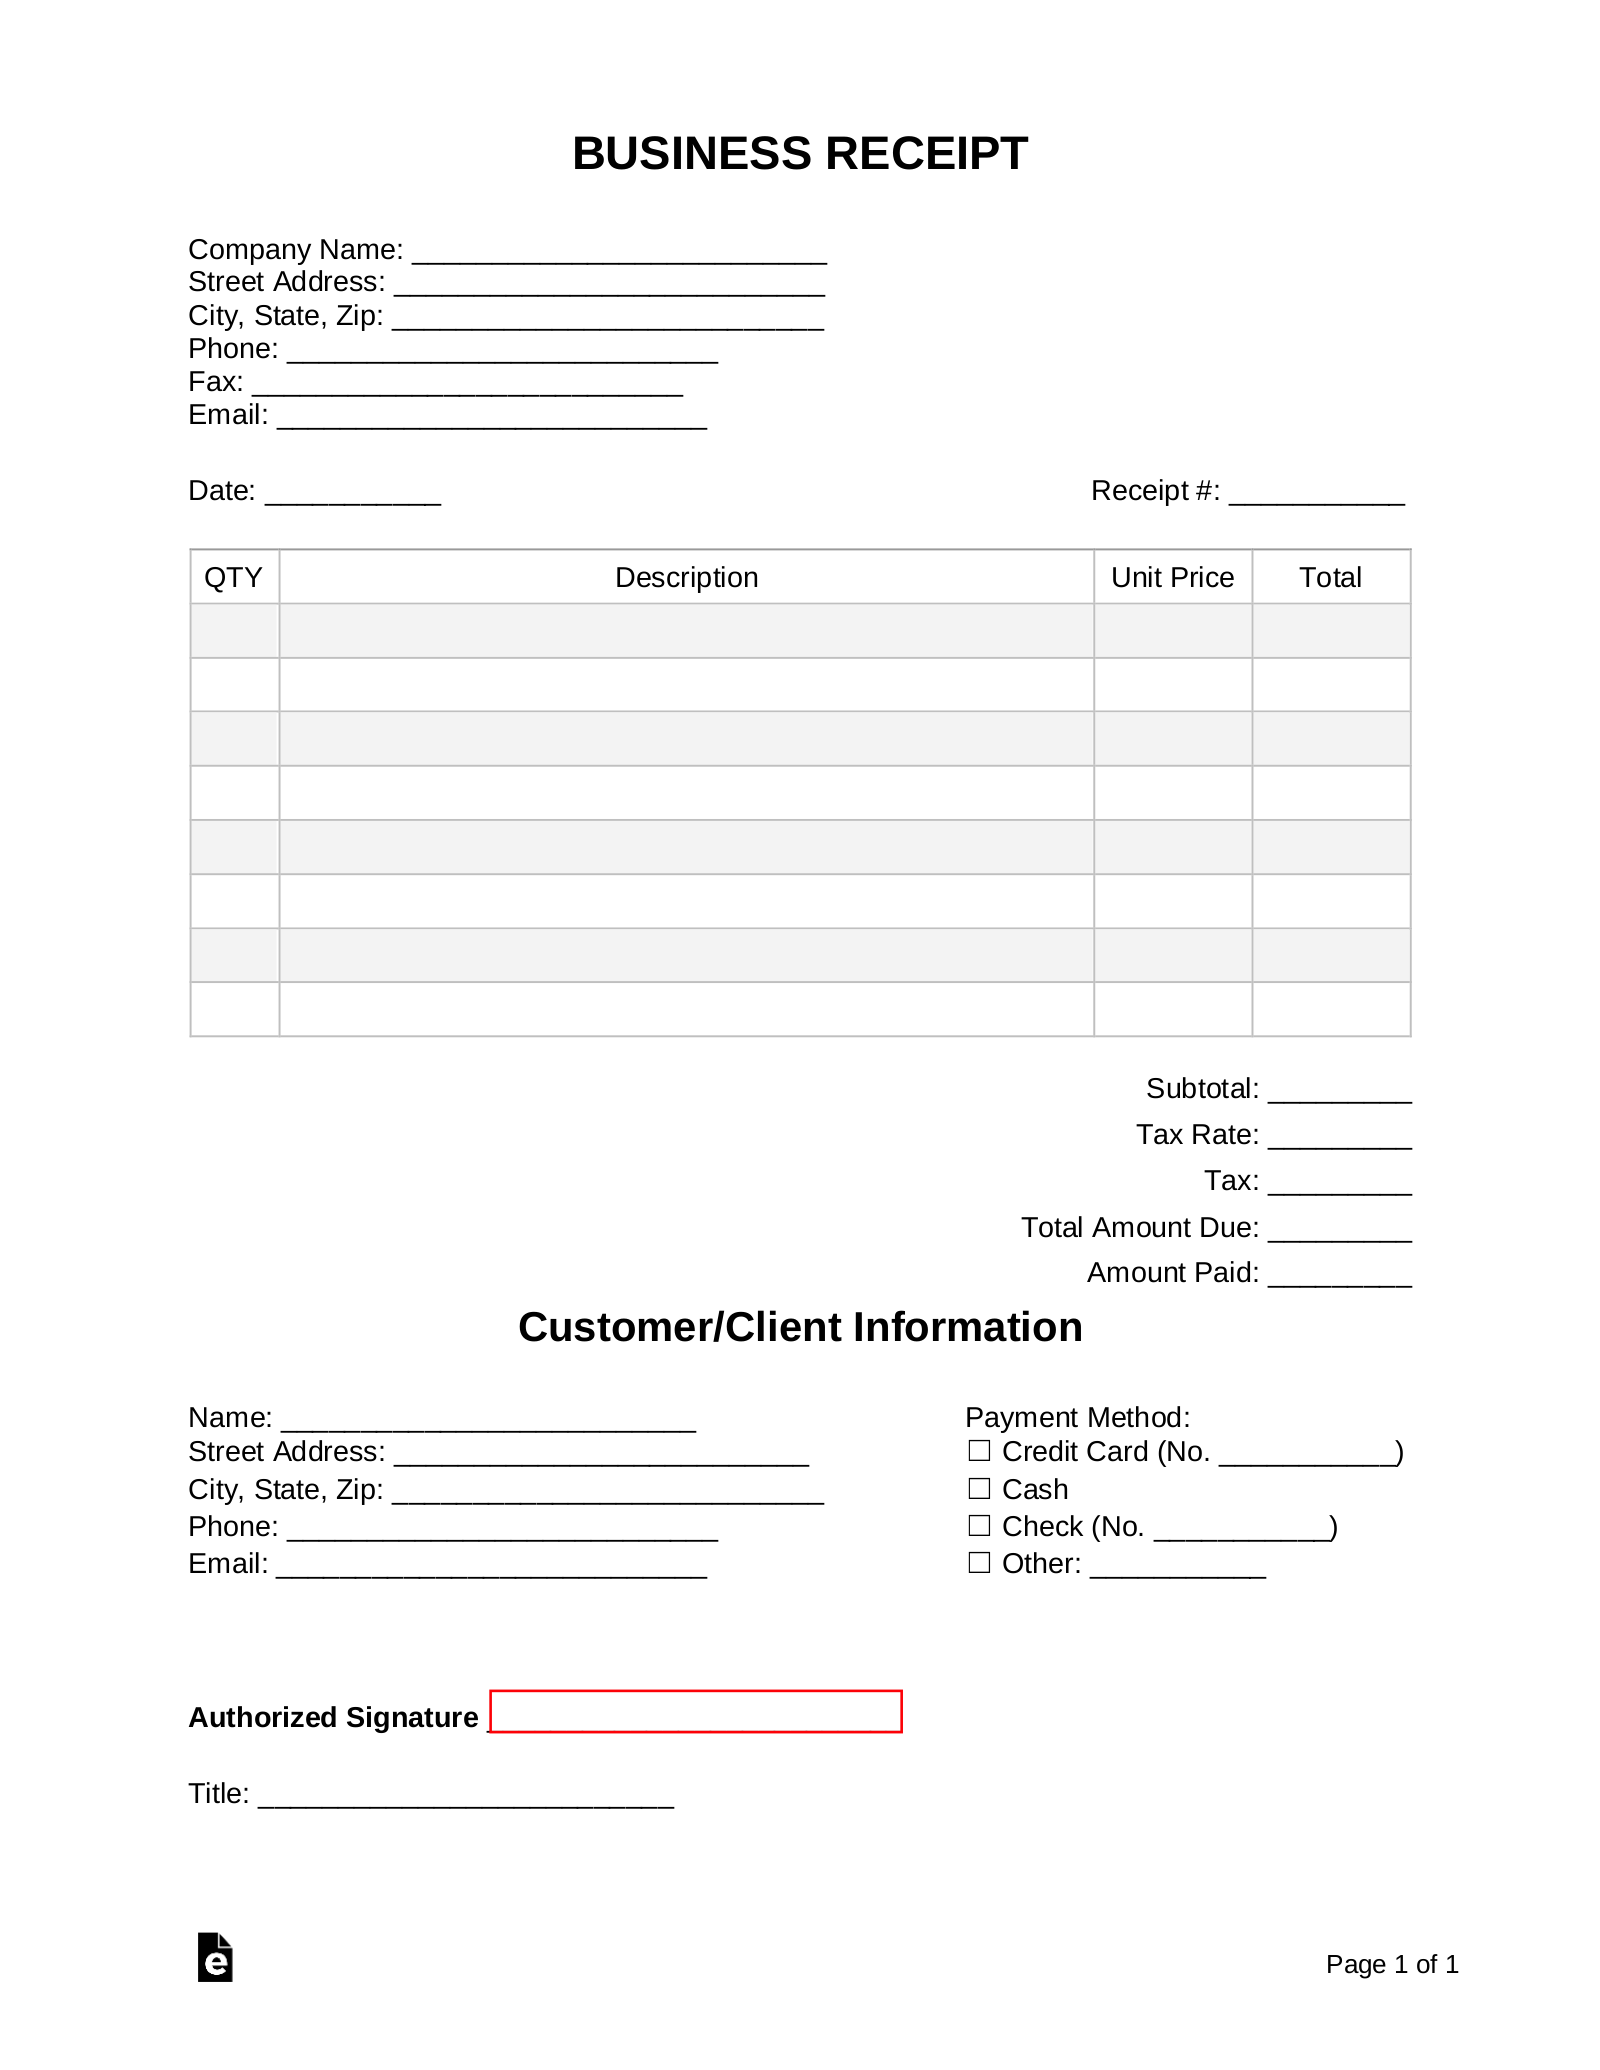 Business Receipts Template from eforms.com